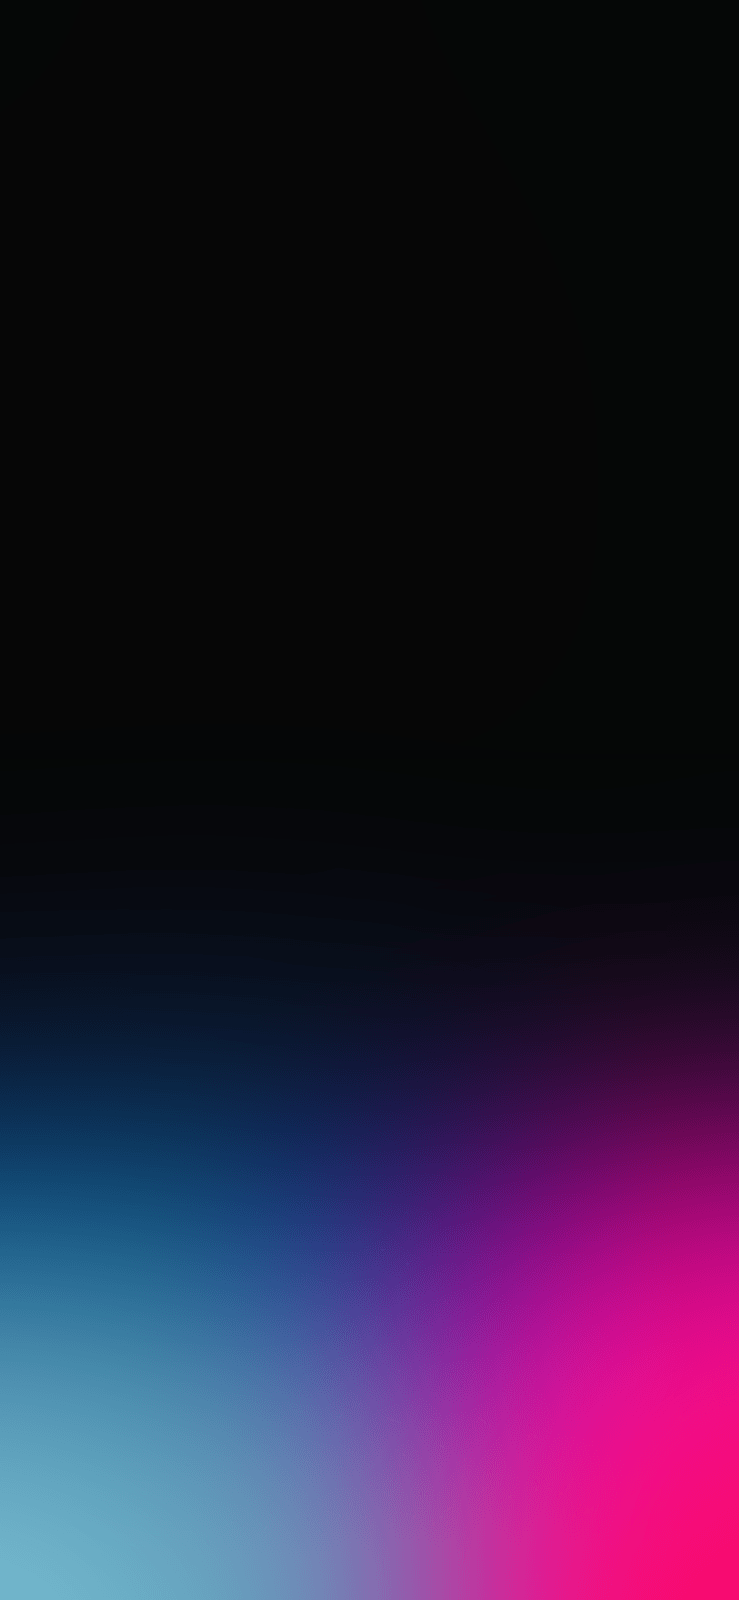 Gradient Blue and Pink by AR72014